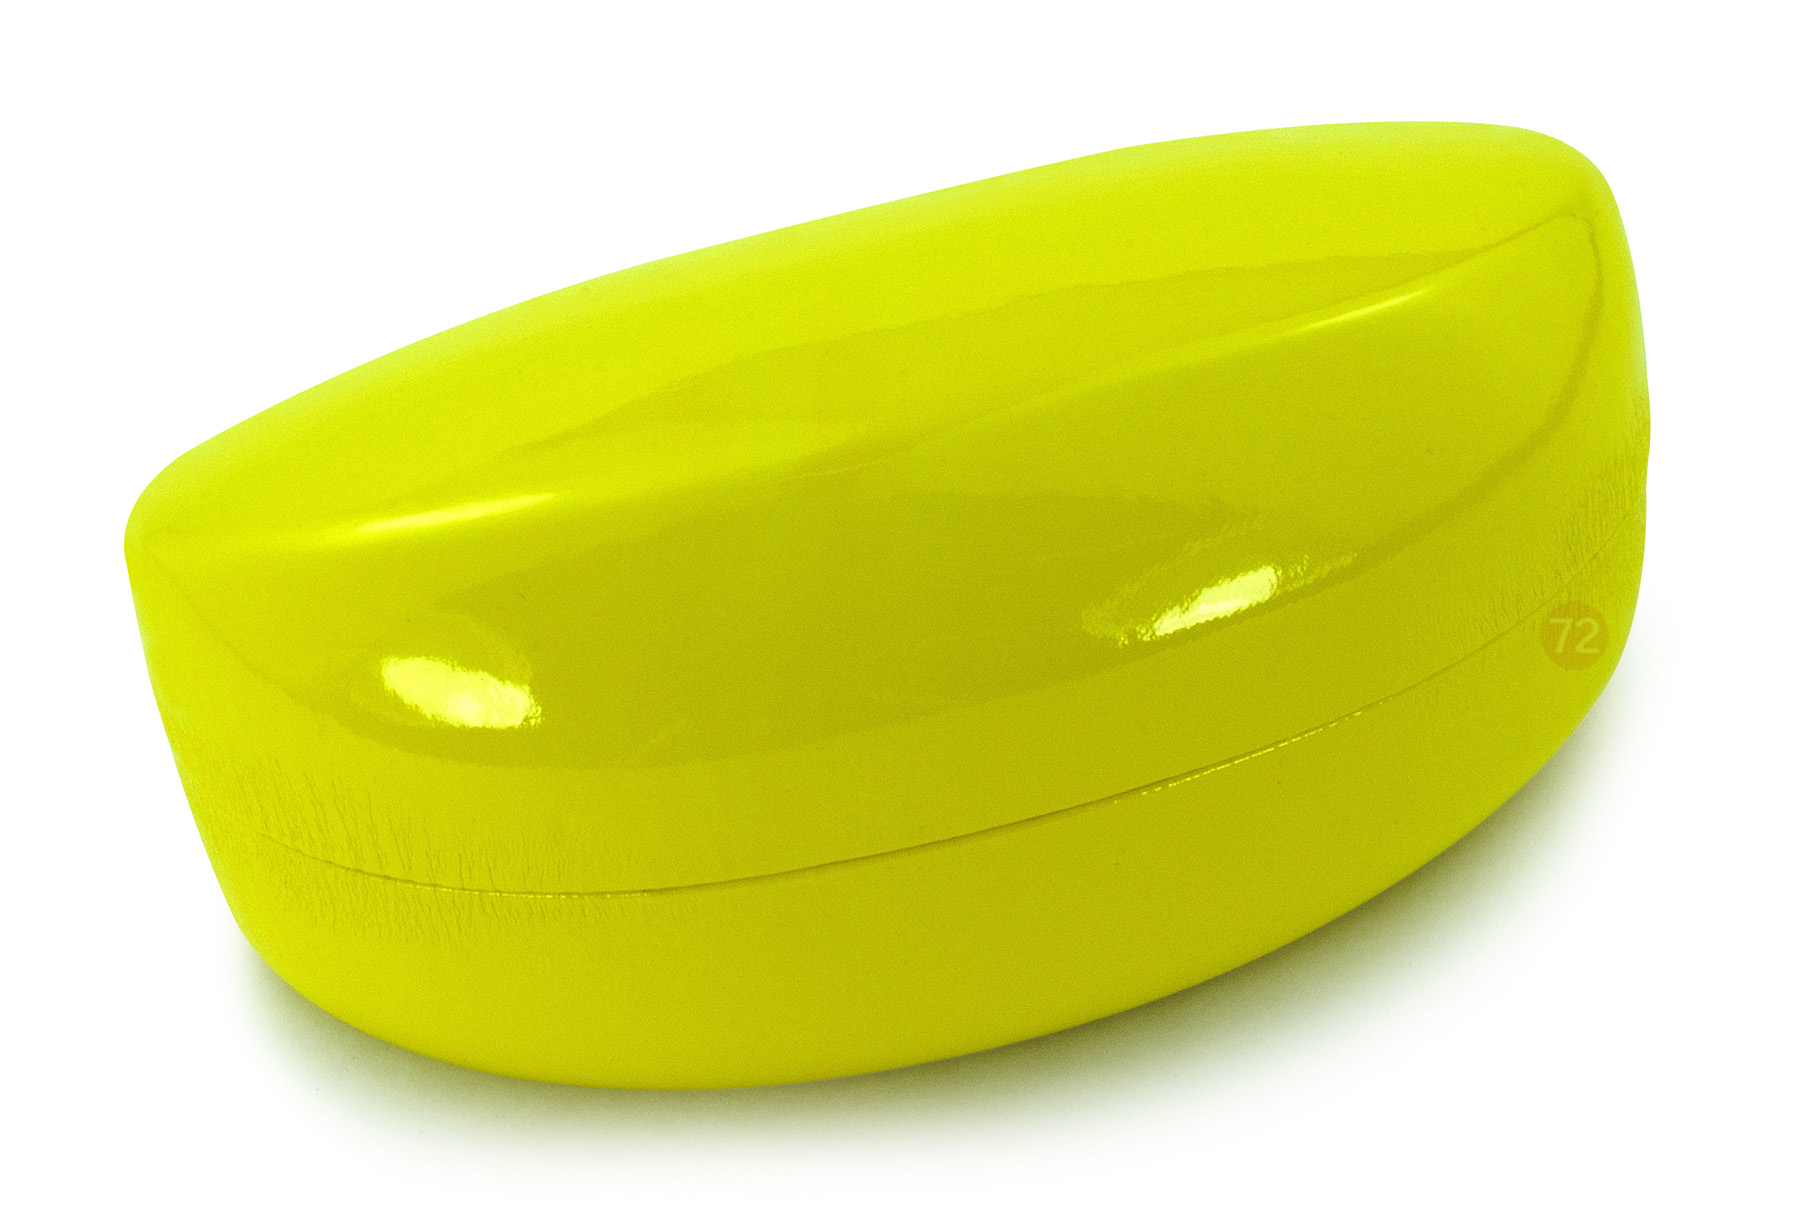 Belle Donne - Womens Clamshell Style Durable Sunglasses Hard Case - Neon Yellow